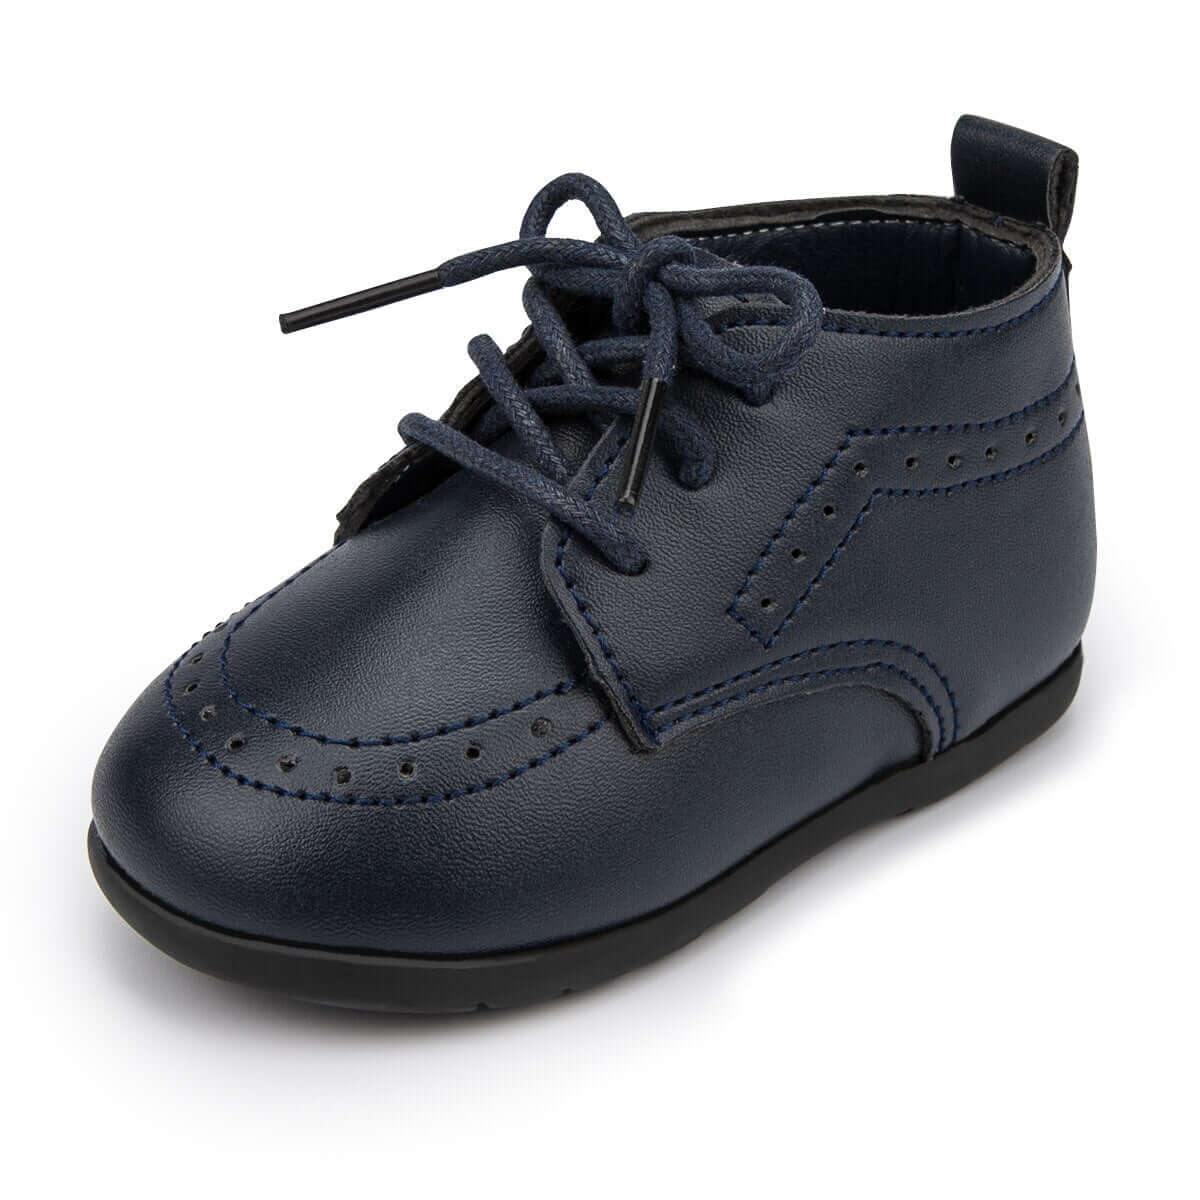 Baby High Top Leather Shoes Baby High Top Leather Shoes Baby Bubble Store Blue 7-12 Months 